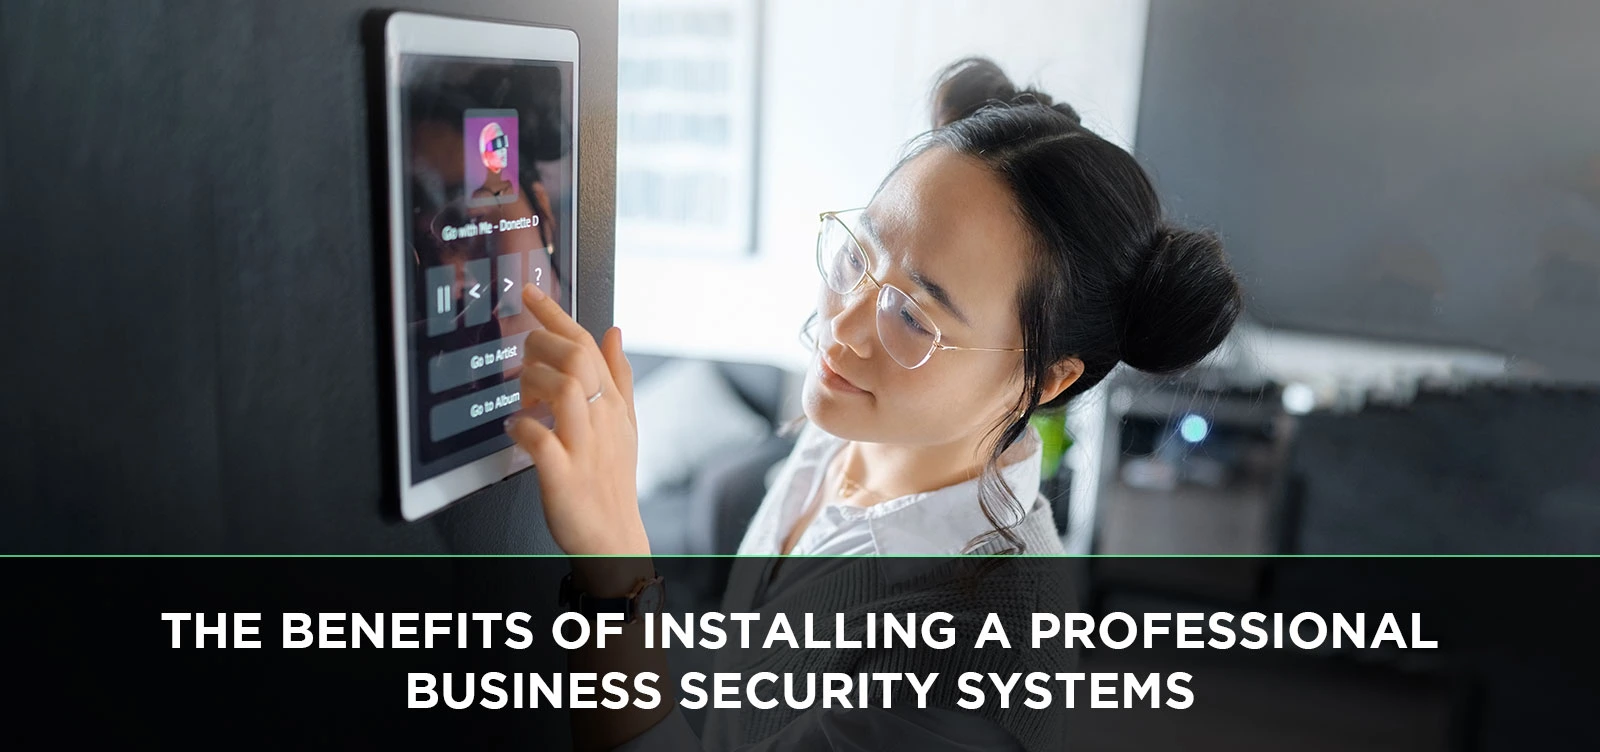 The Benefits of Installing a Professional Business Security Systems